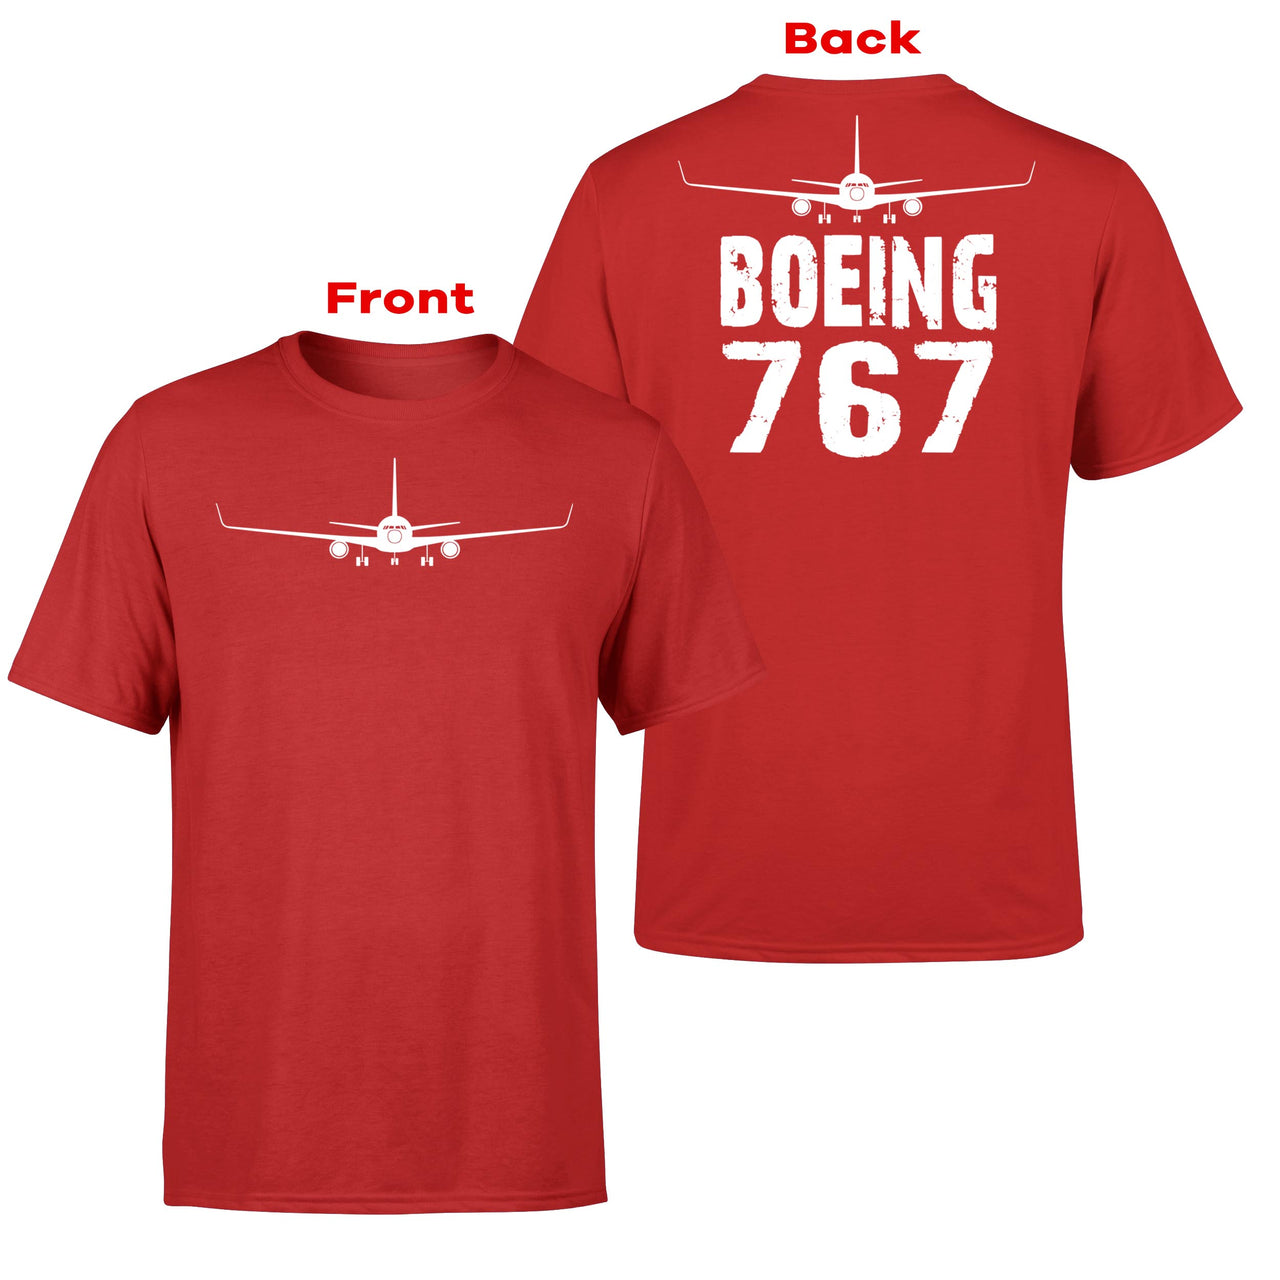 Boeing 767 & Plane Designed Double-Side T-Shirts